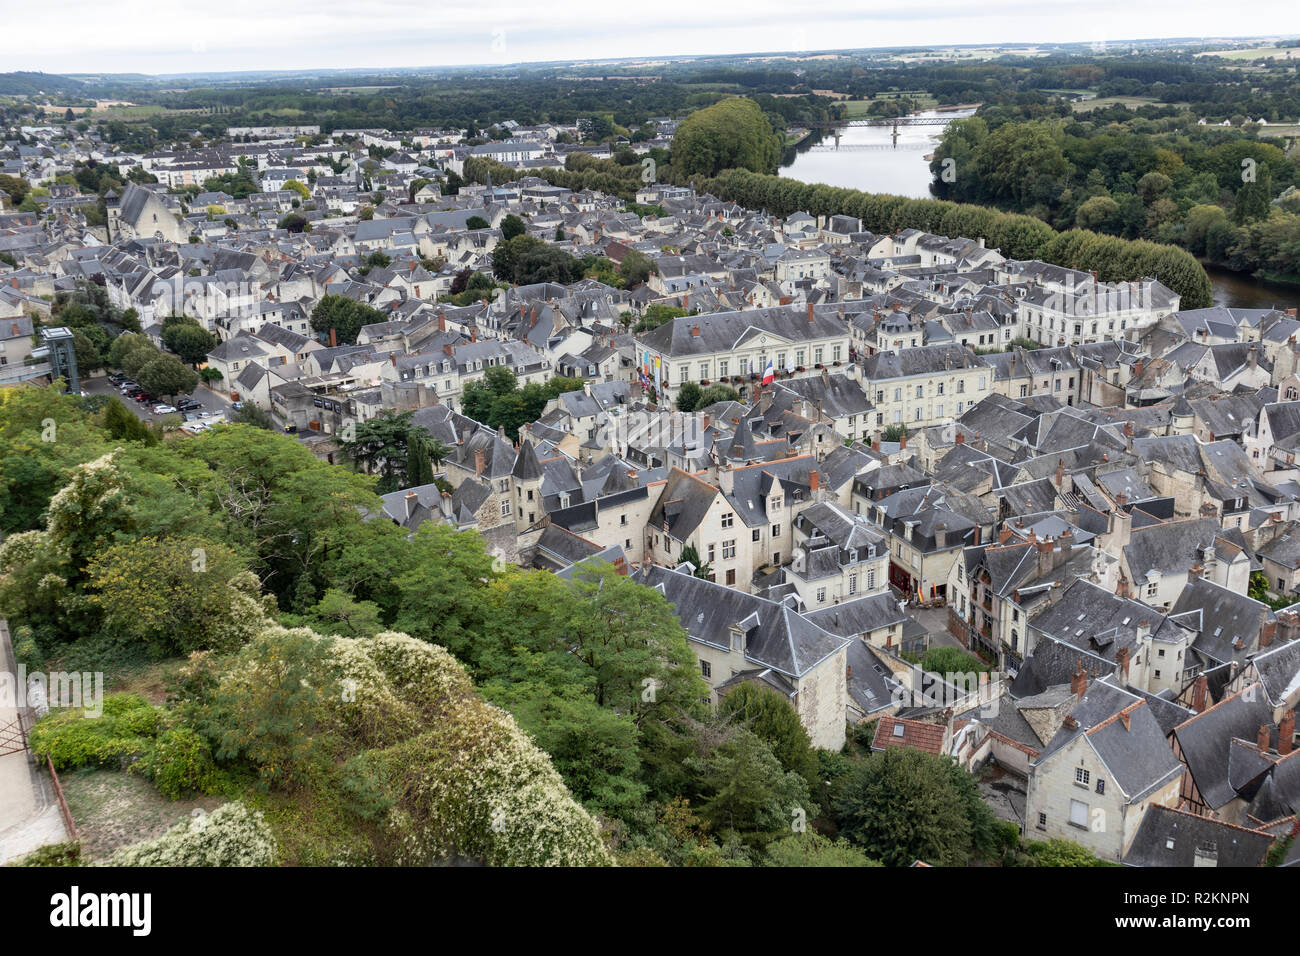 A view of Chinon in the Loire Valley, taken from the Castle forteresse royale. Stock Photo